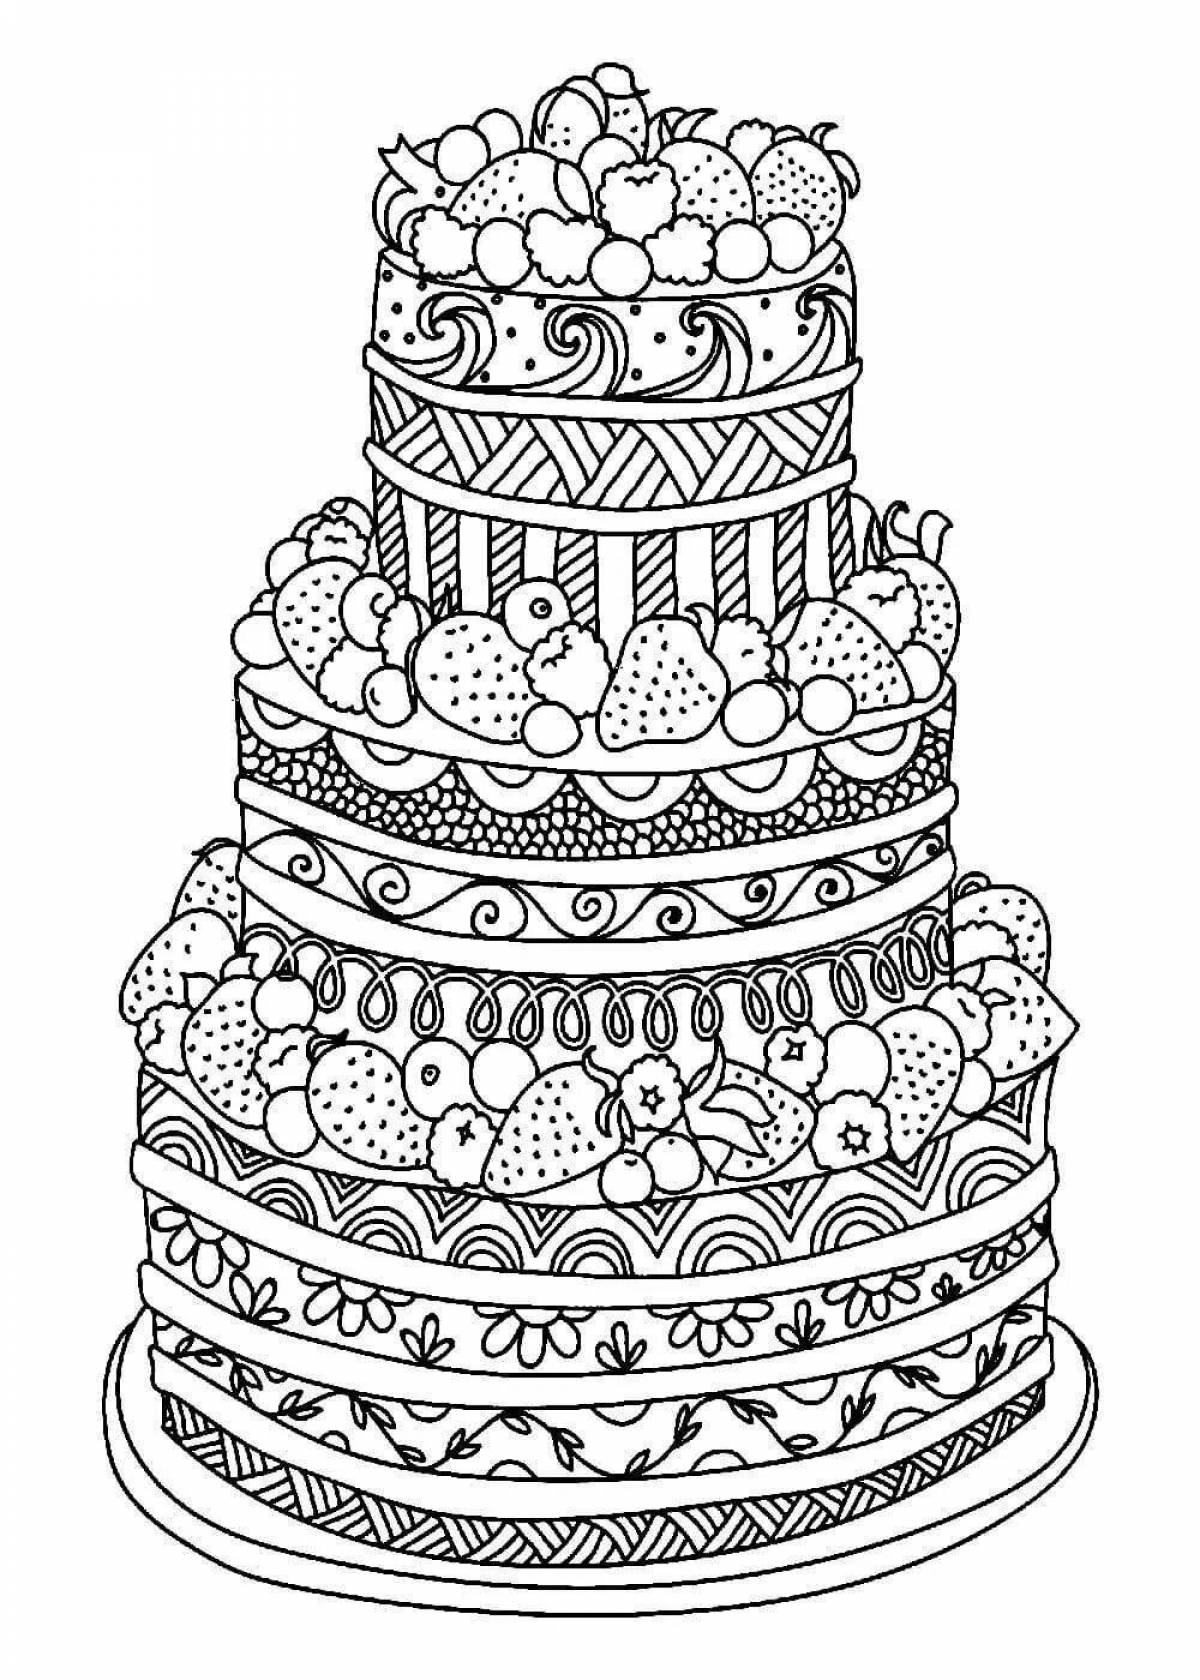 Outstanding beautiful cake coloring page